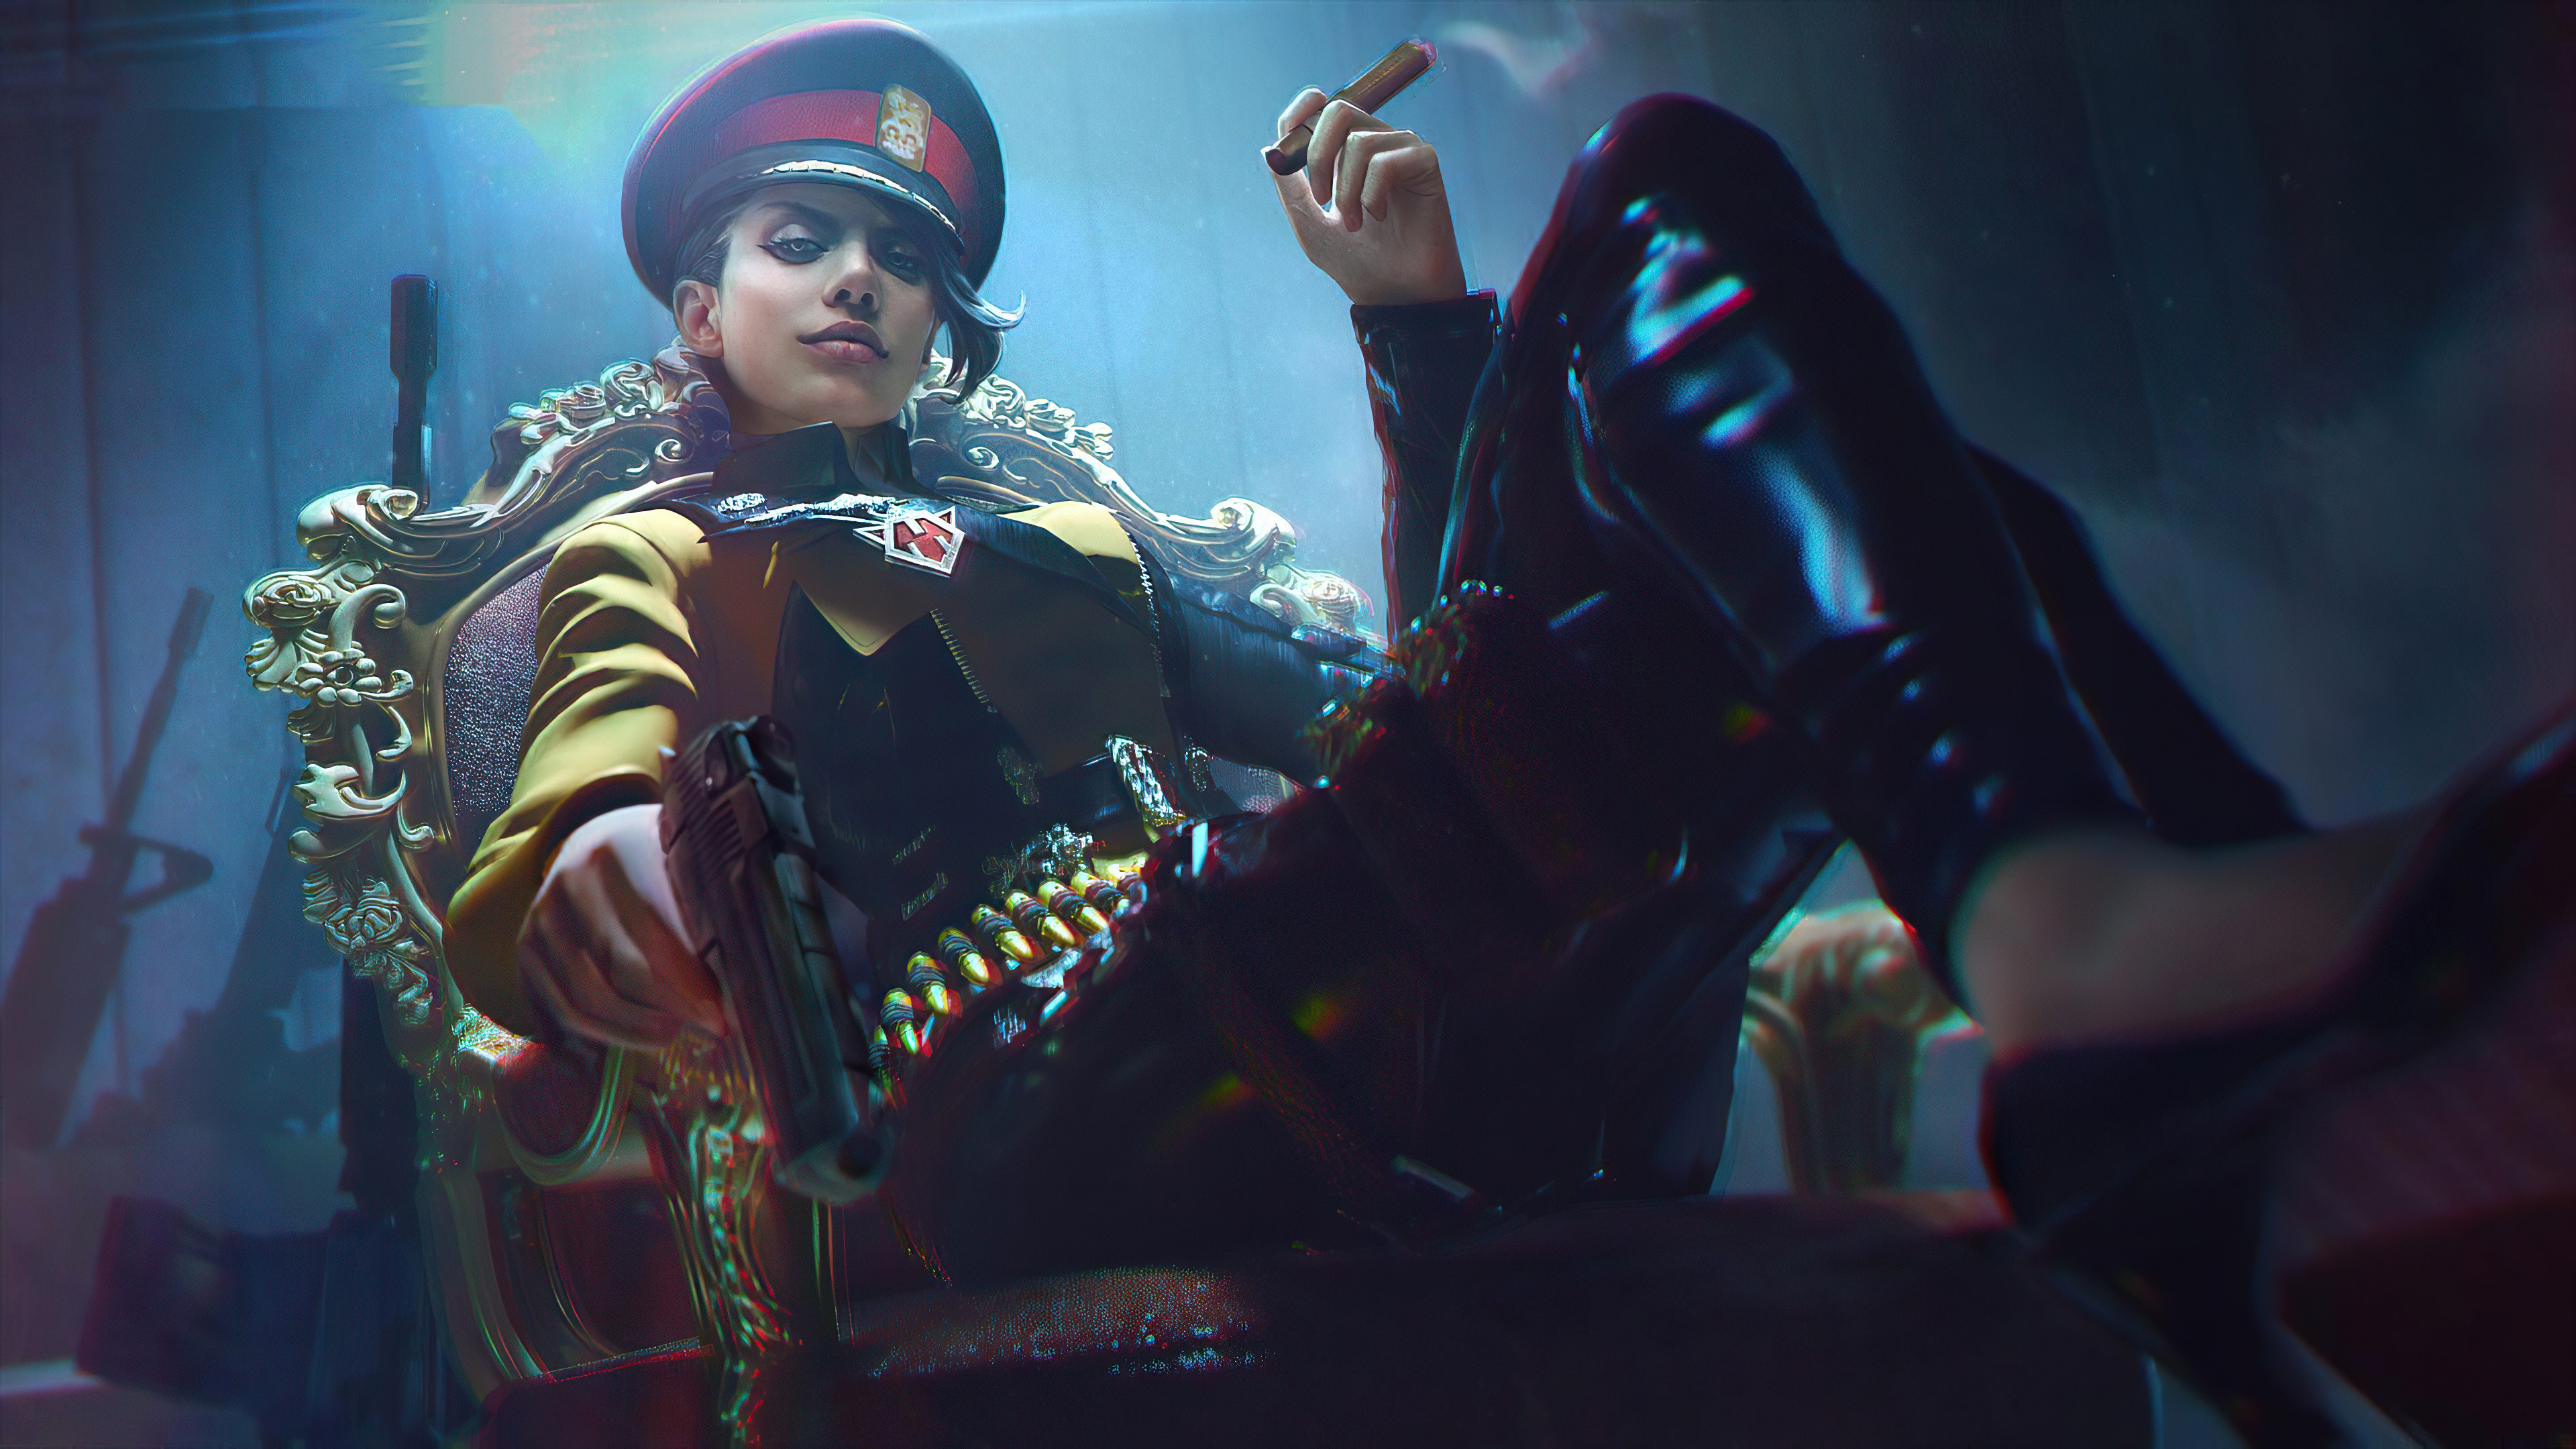 Paloma character, Free Fire HD wallpapers, Striking poses, Artistic images, 3840x2160 4K Desktop